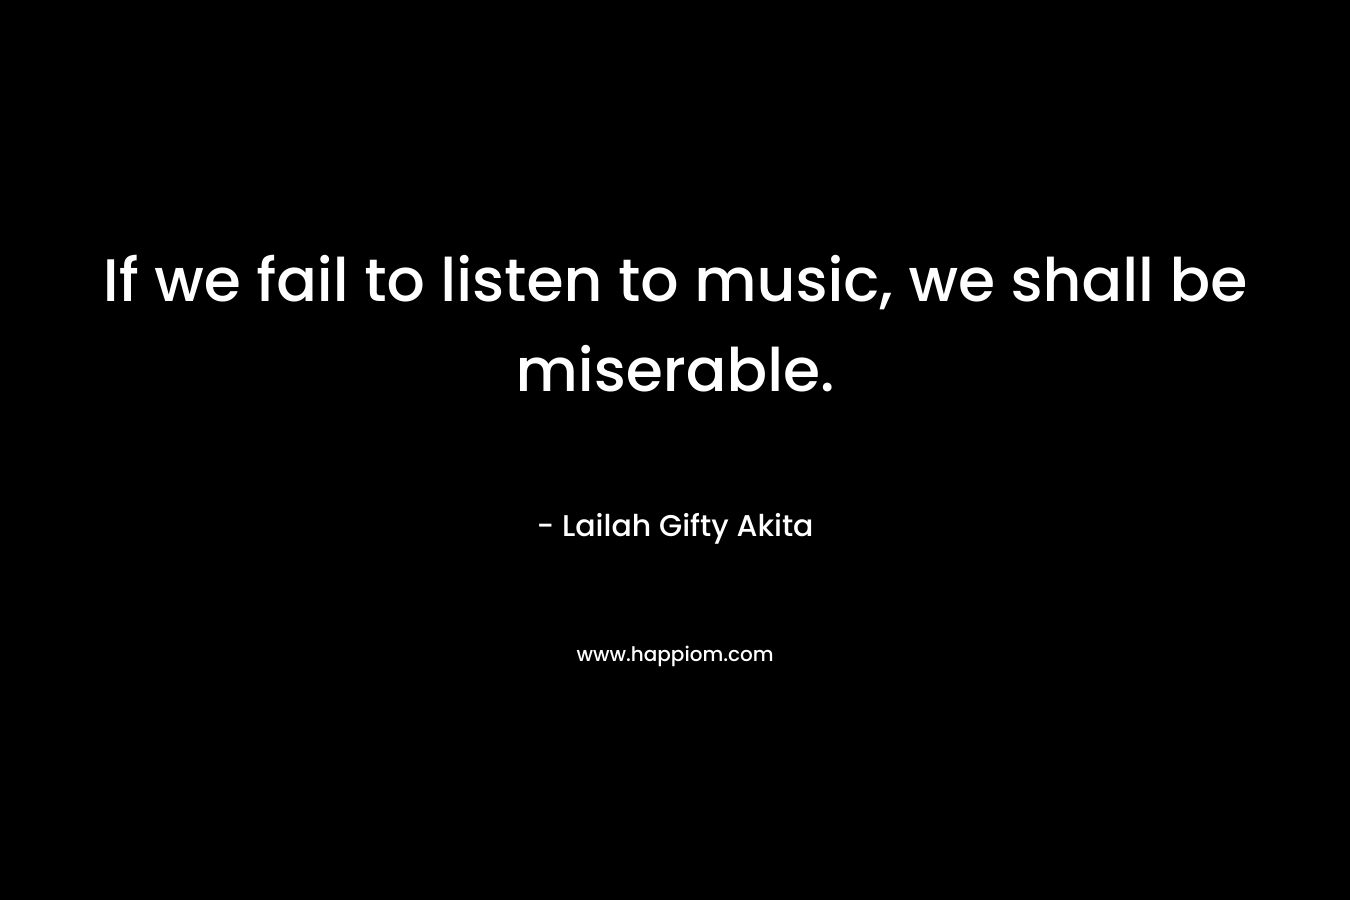 If we fail to listen to music, we shall be miserable.